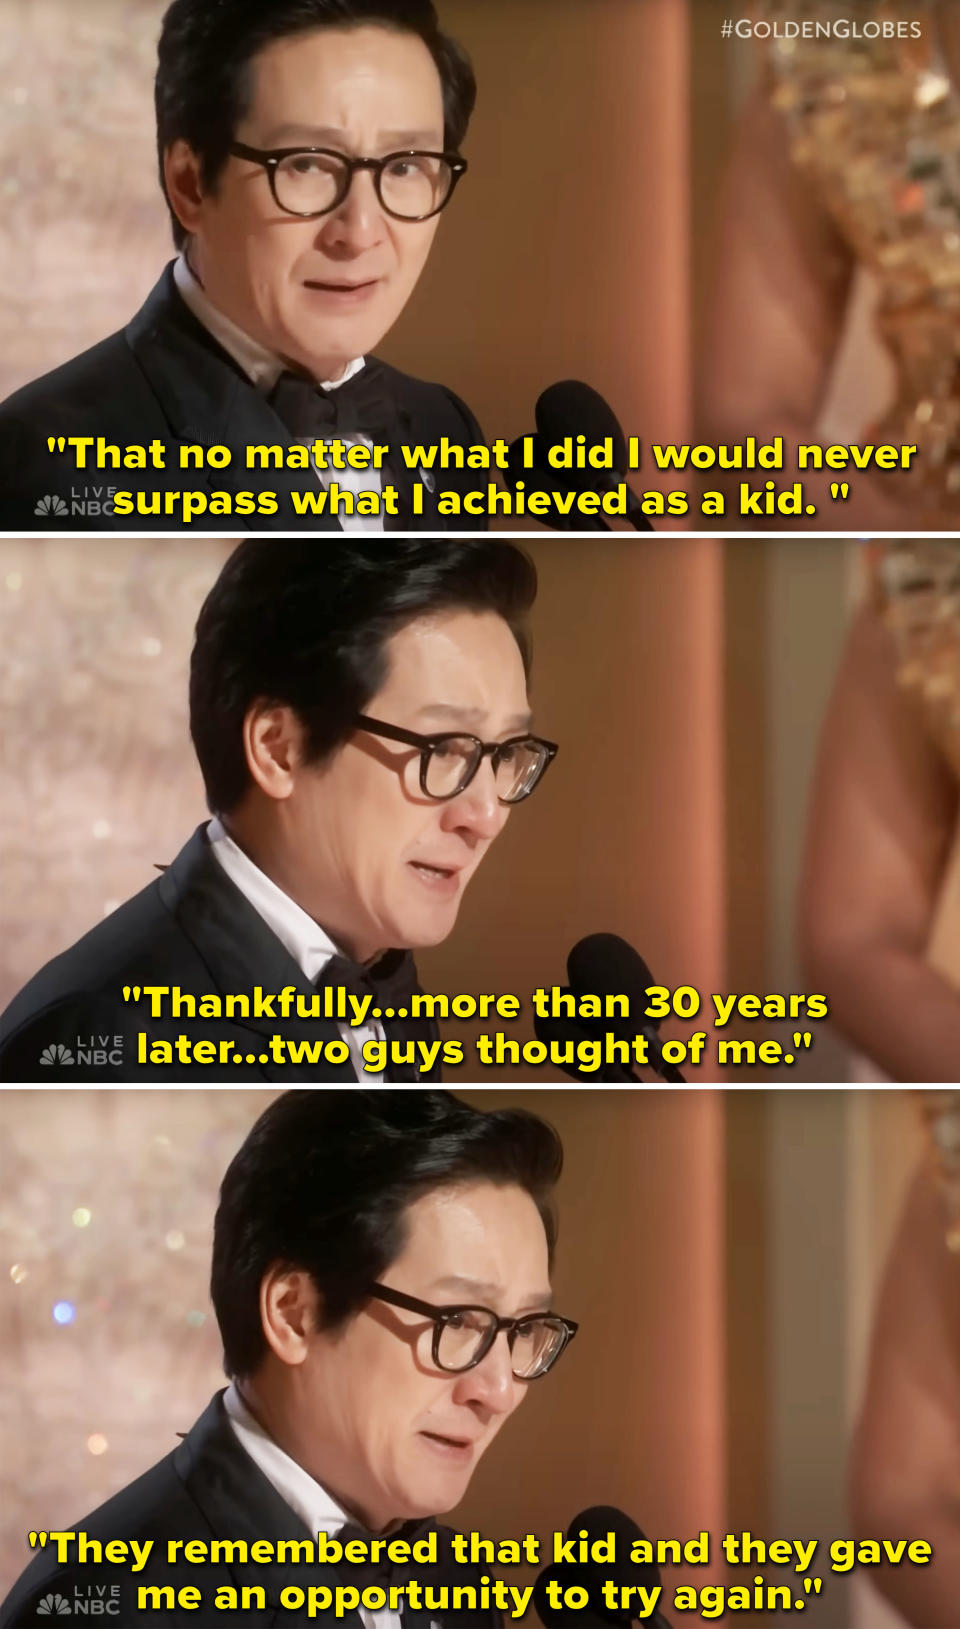 Ke talked about how he thought he would never surpass what he did as a child actor but that, thankfully, two guys thought of him 30 years later